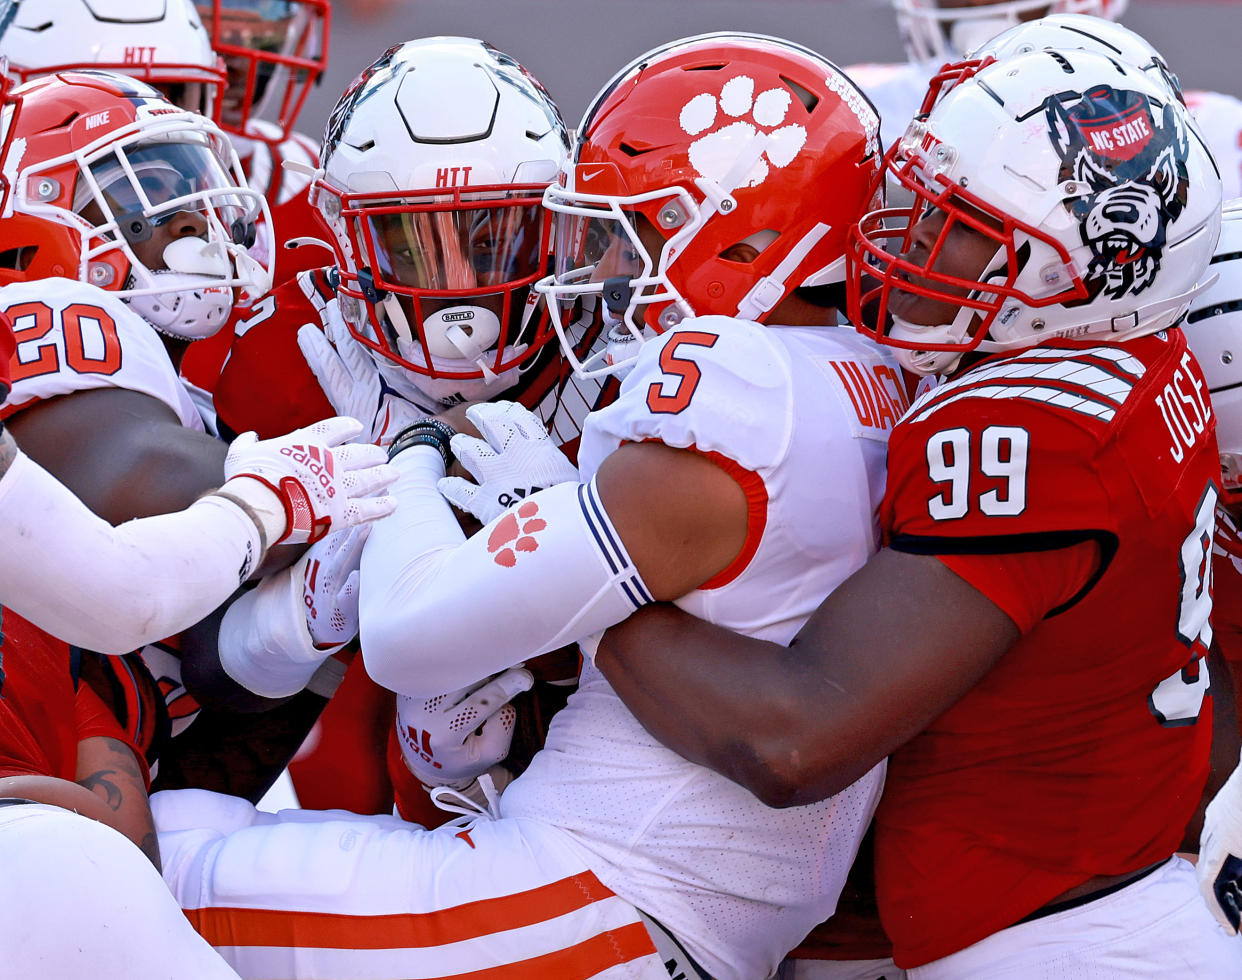 North Carolina State's Daniel Joseph tackles Clemson's D.J. Uiagalelei during the first half on Saturday. (Grant Halverson/Getty Images)